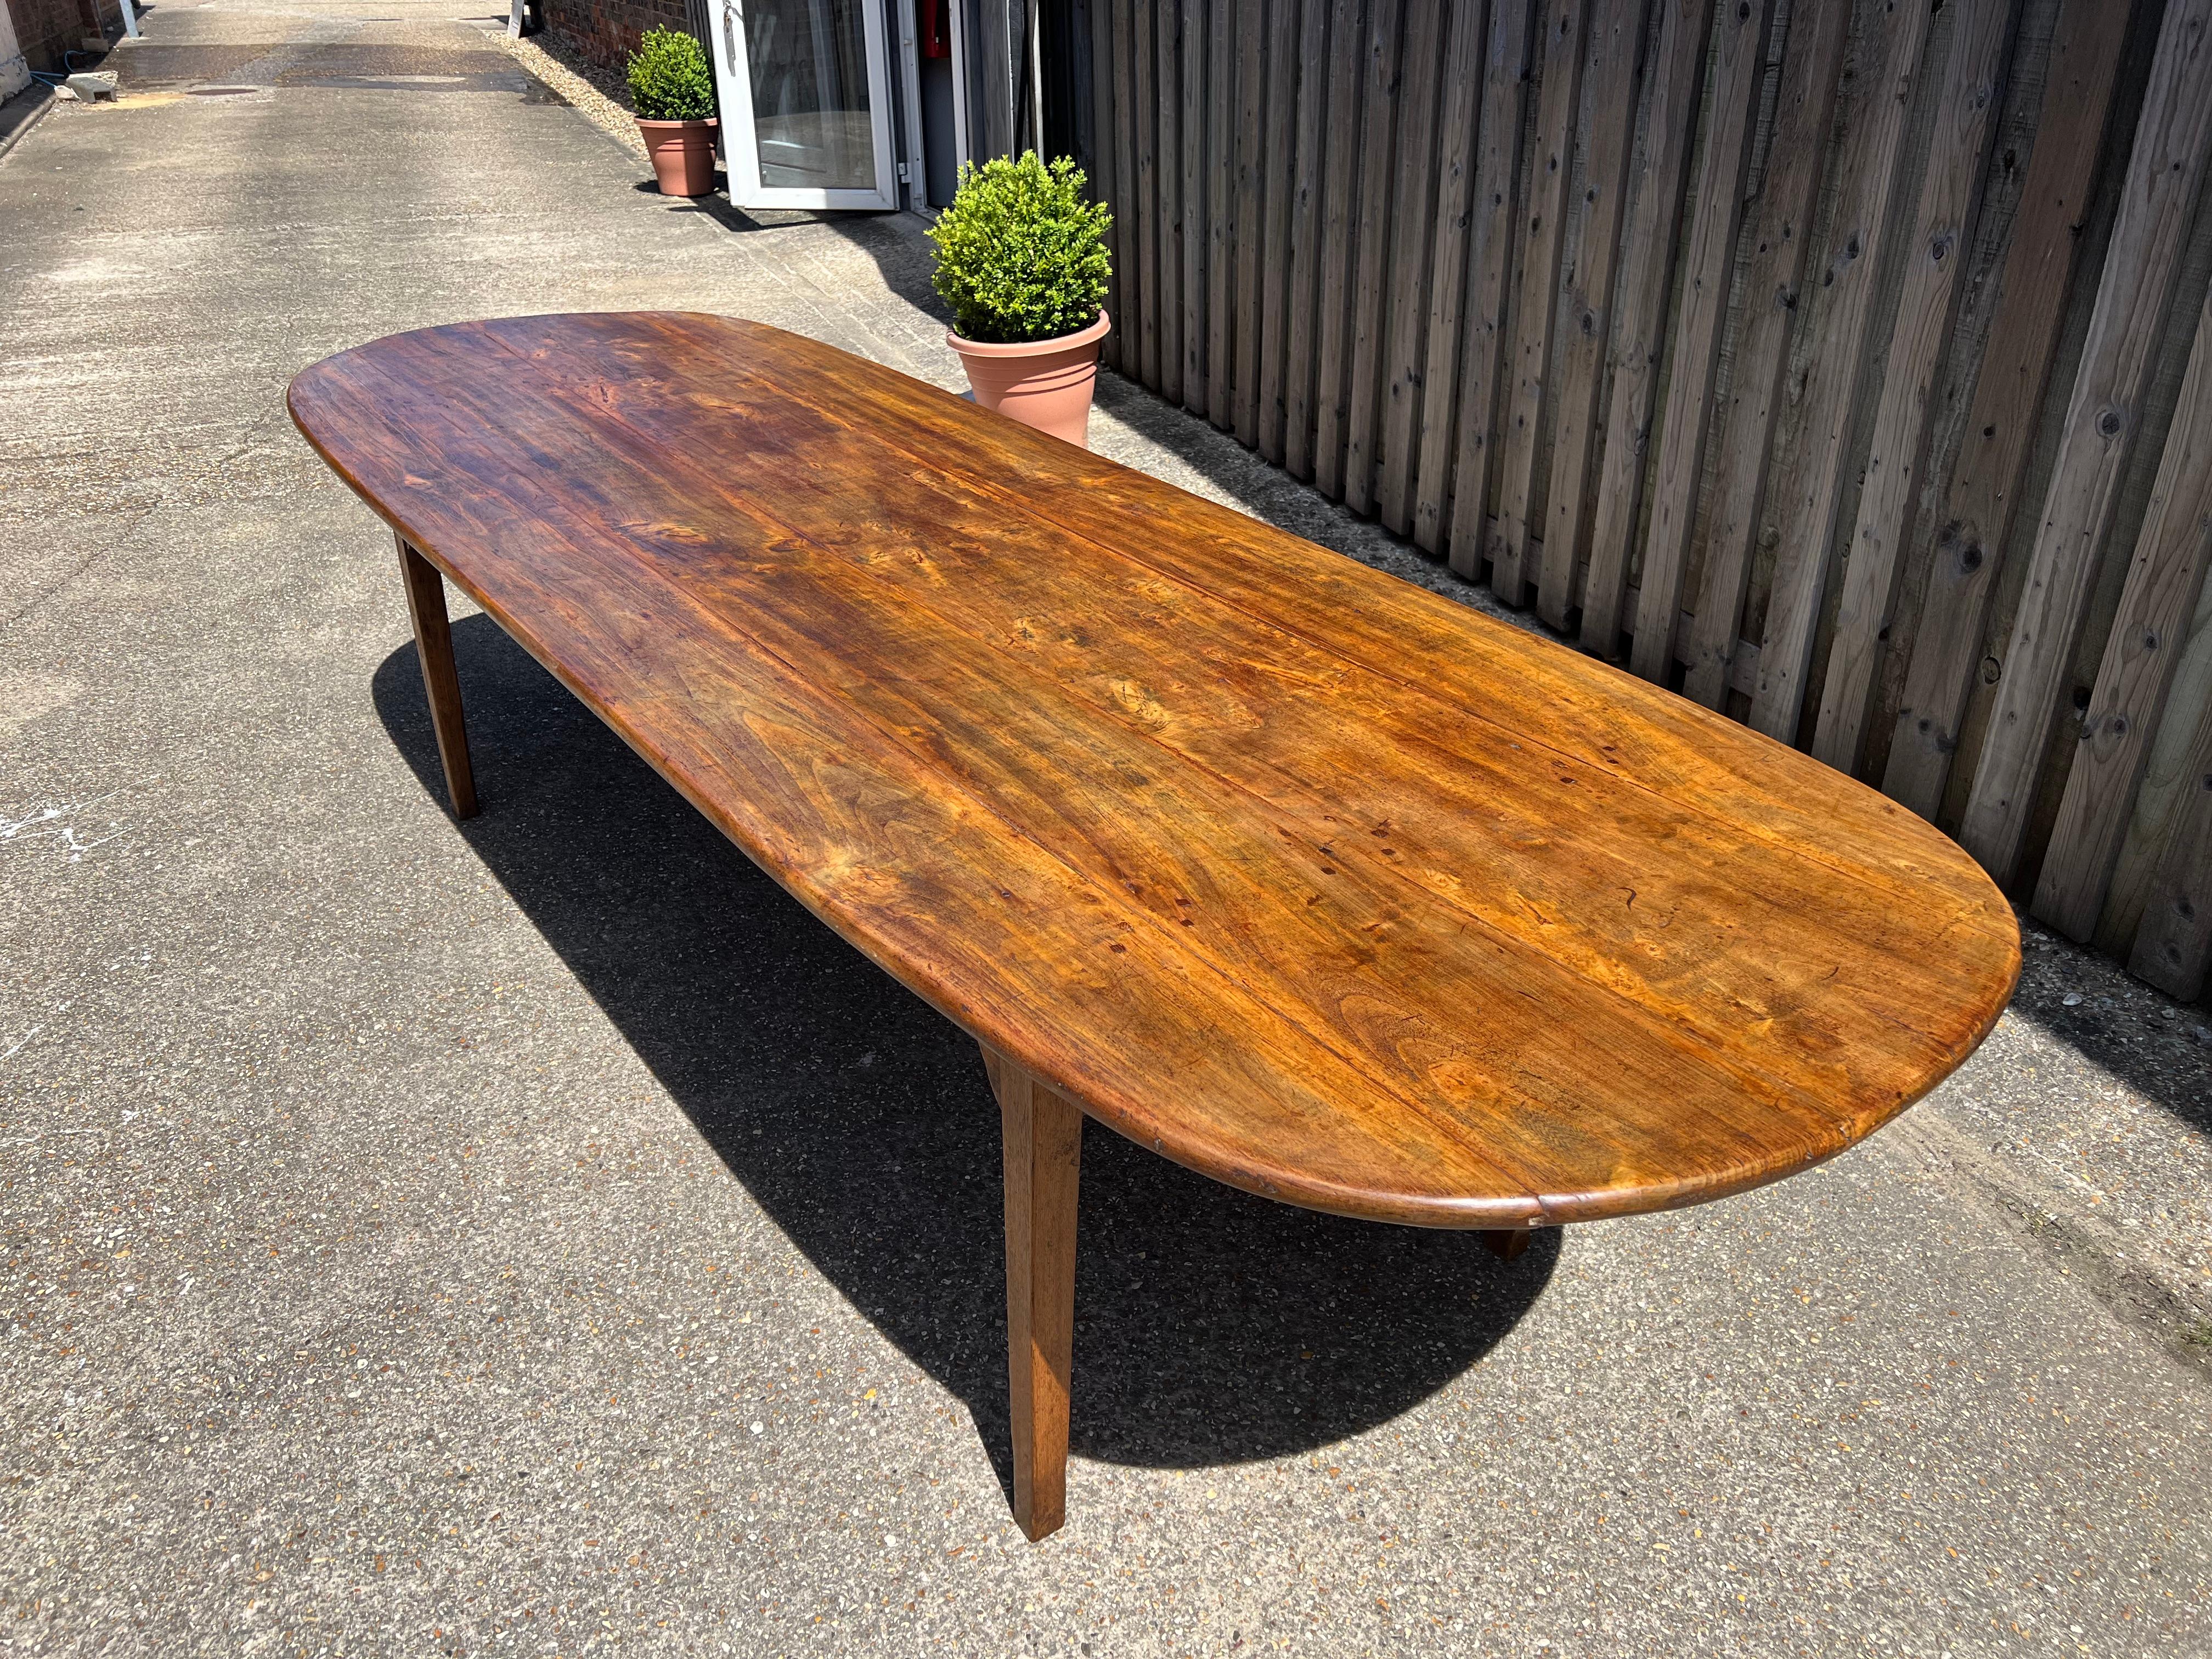 Mid 19th century oval ended table with four plank top. The table sits on beautiful tapered oak legs and oak base. Gorgeous colour and patina. The table has brackets on apron and the table top is sturdy and wide with a rustic feel to it. 
      